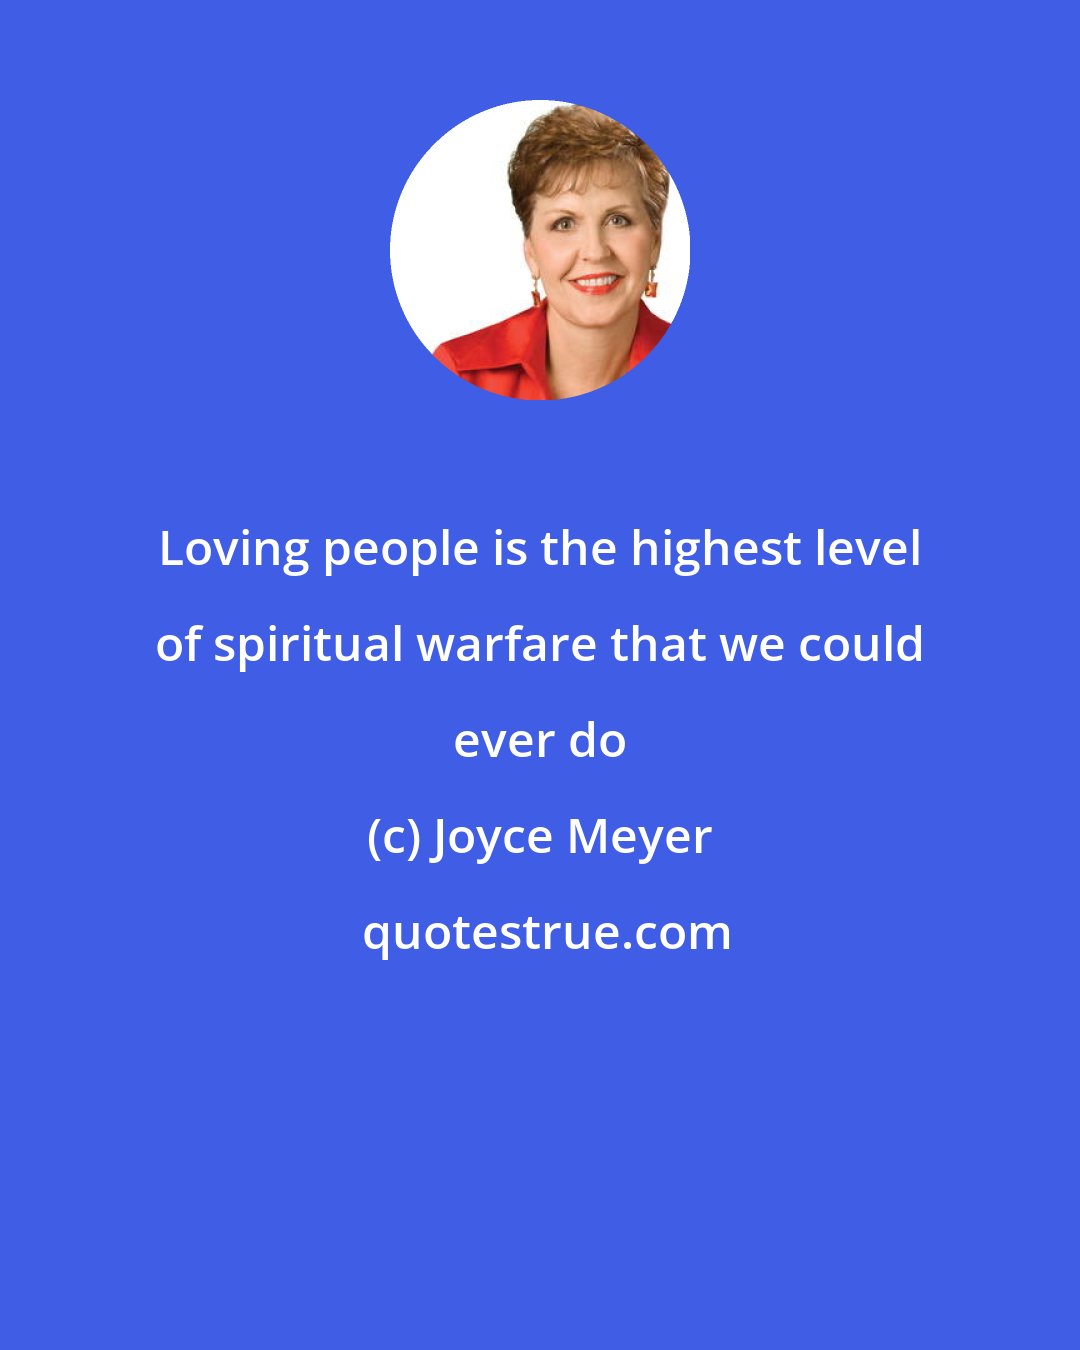 Joyce Meyer: Loving people is the highest level of spiritual warfare that we could ever do